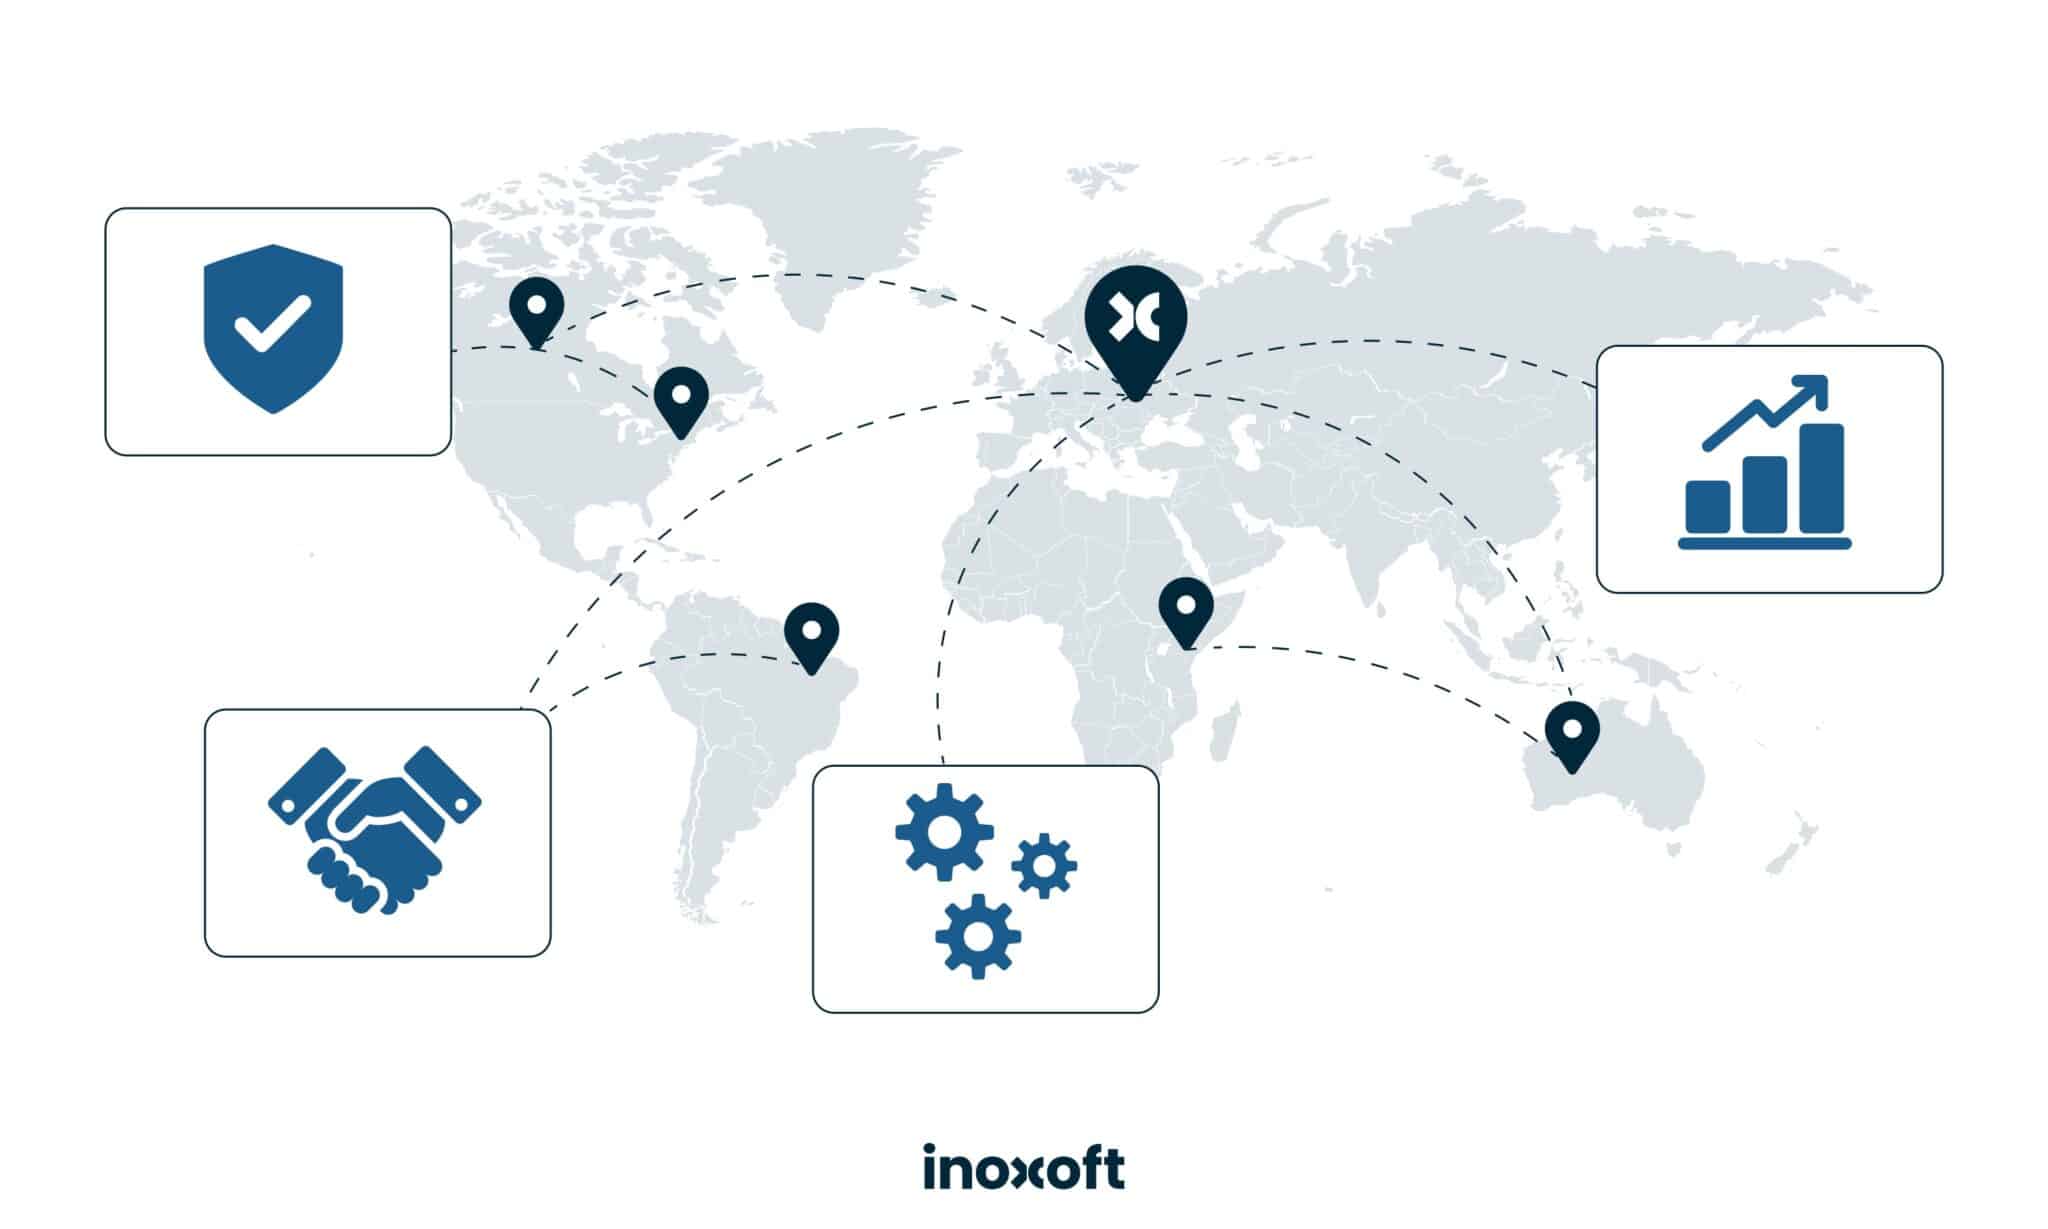 Inoxoft is an international company that works according to Agile principles.